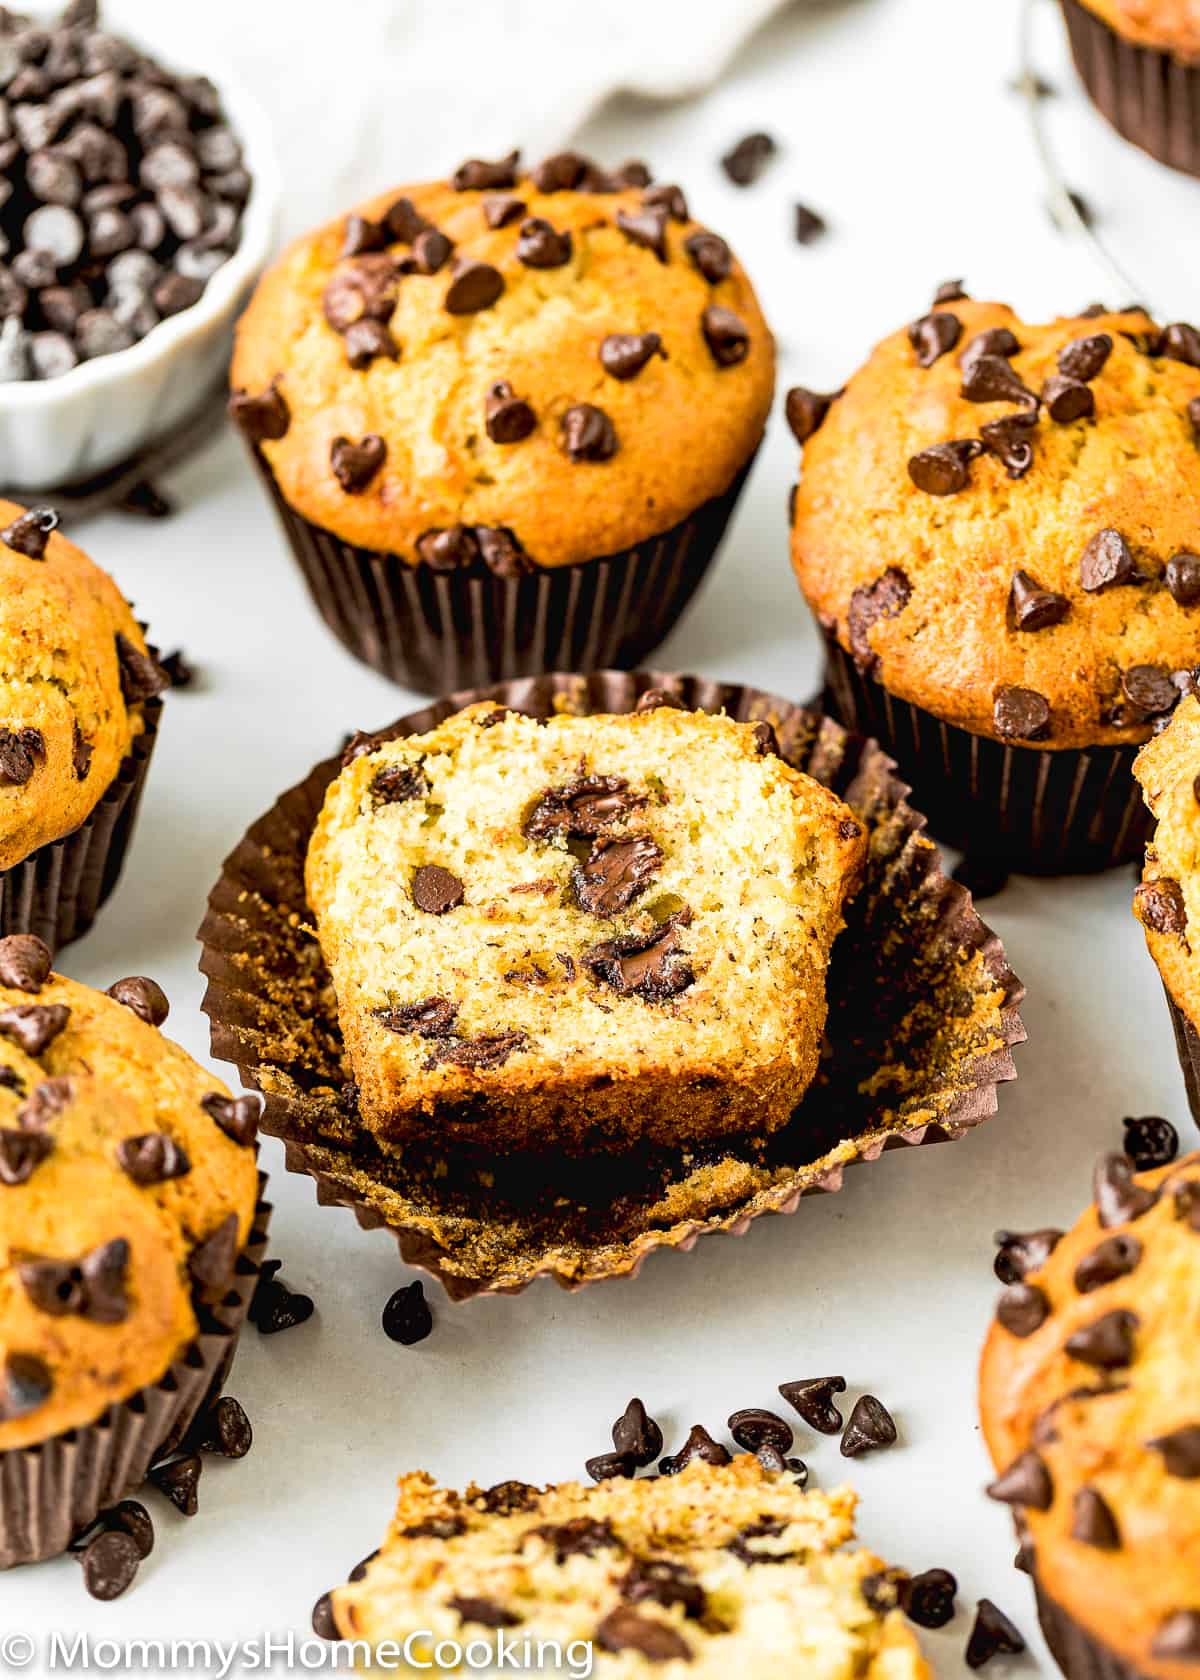 one Eggless Banana Chocolate Chip Muffin cut open with other muffins around it.